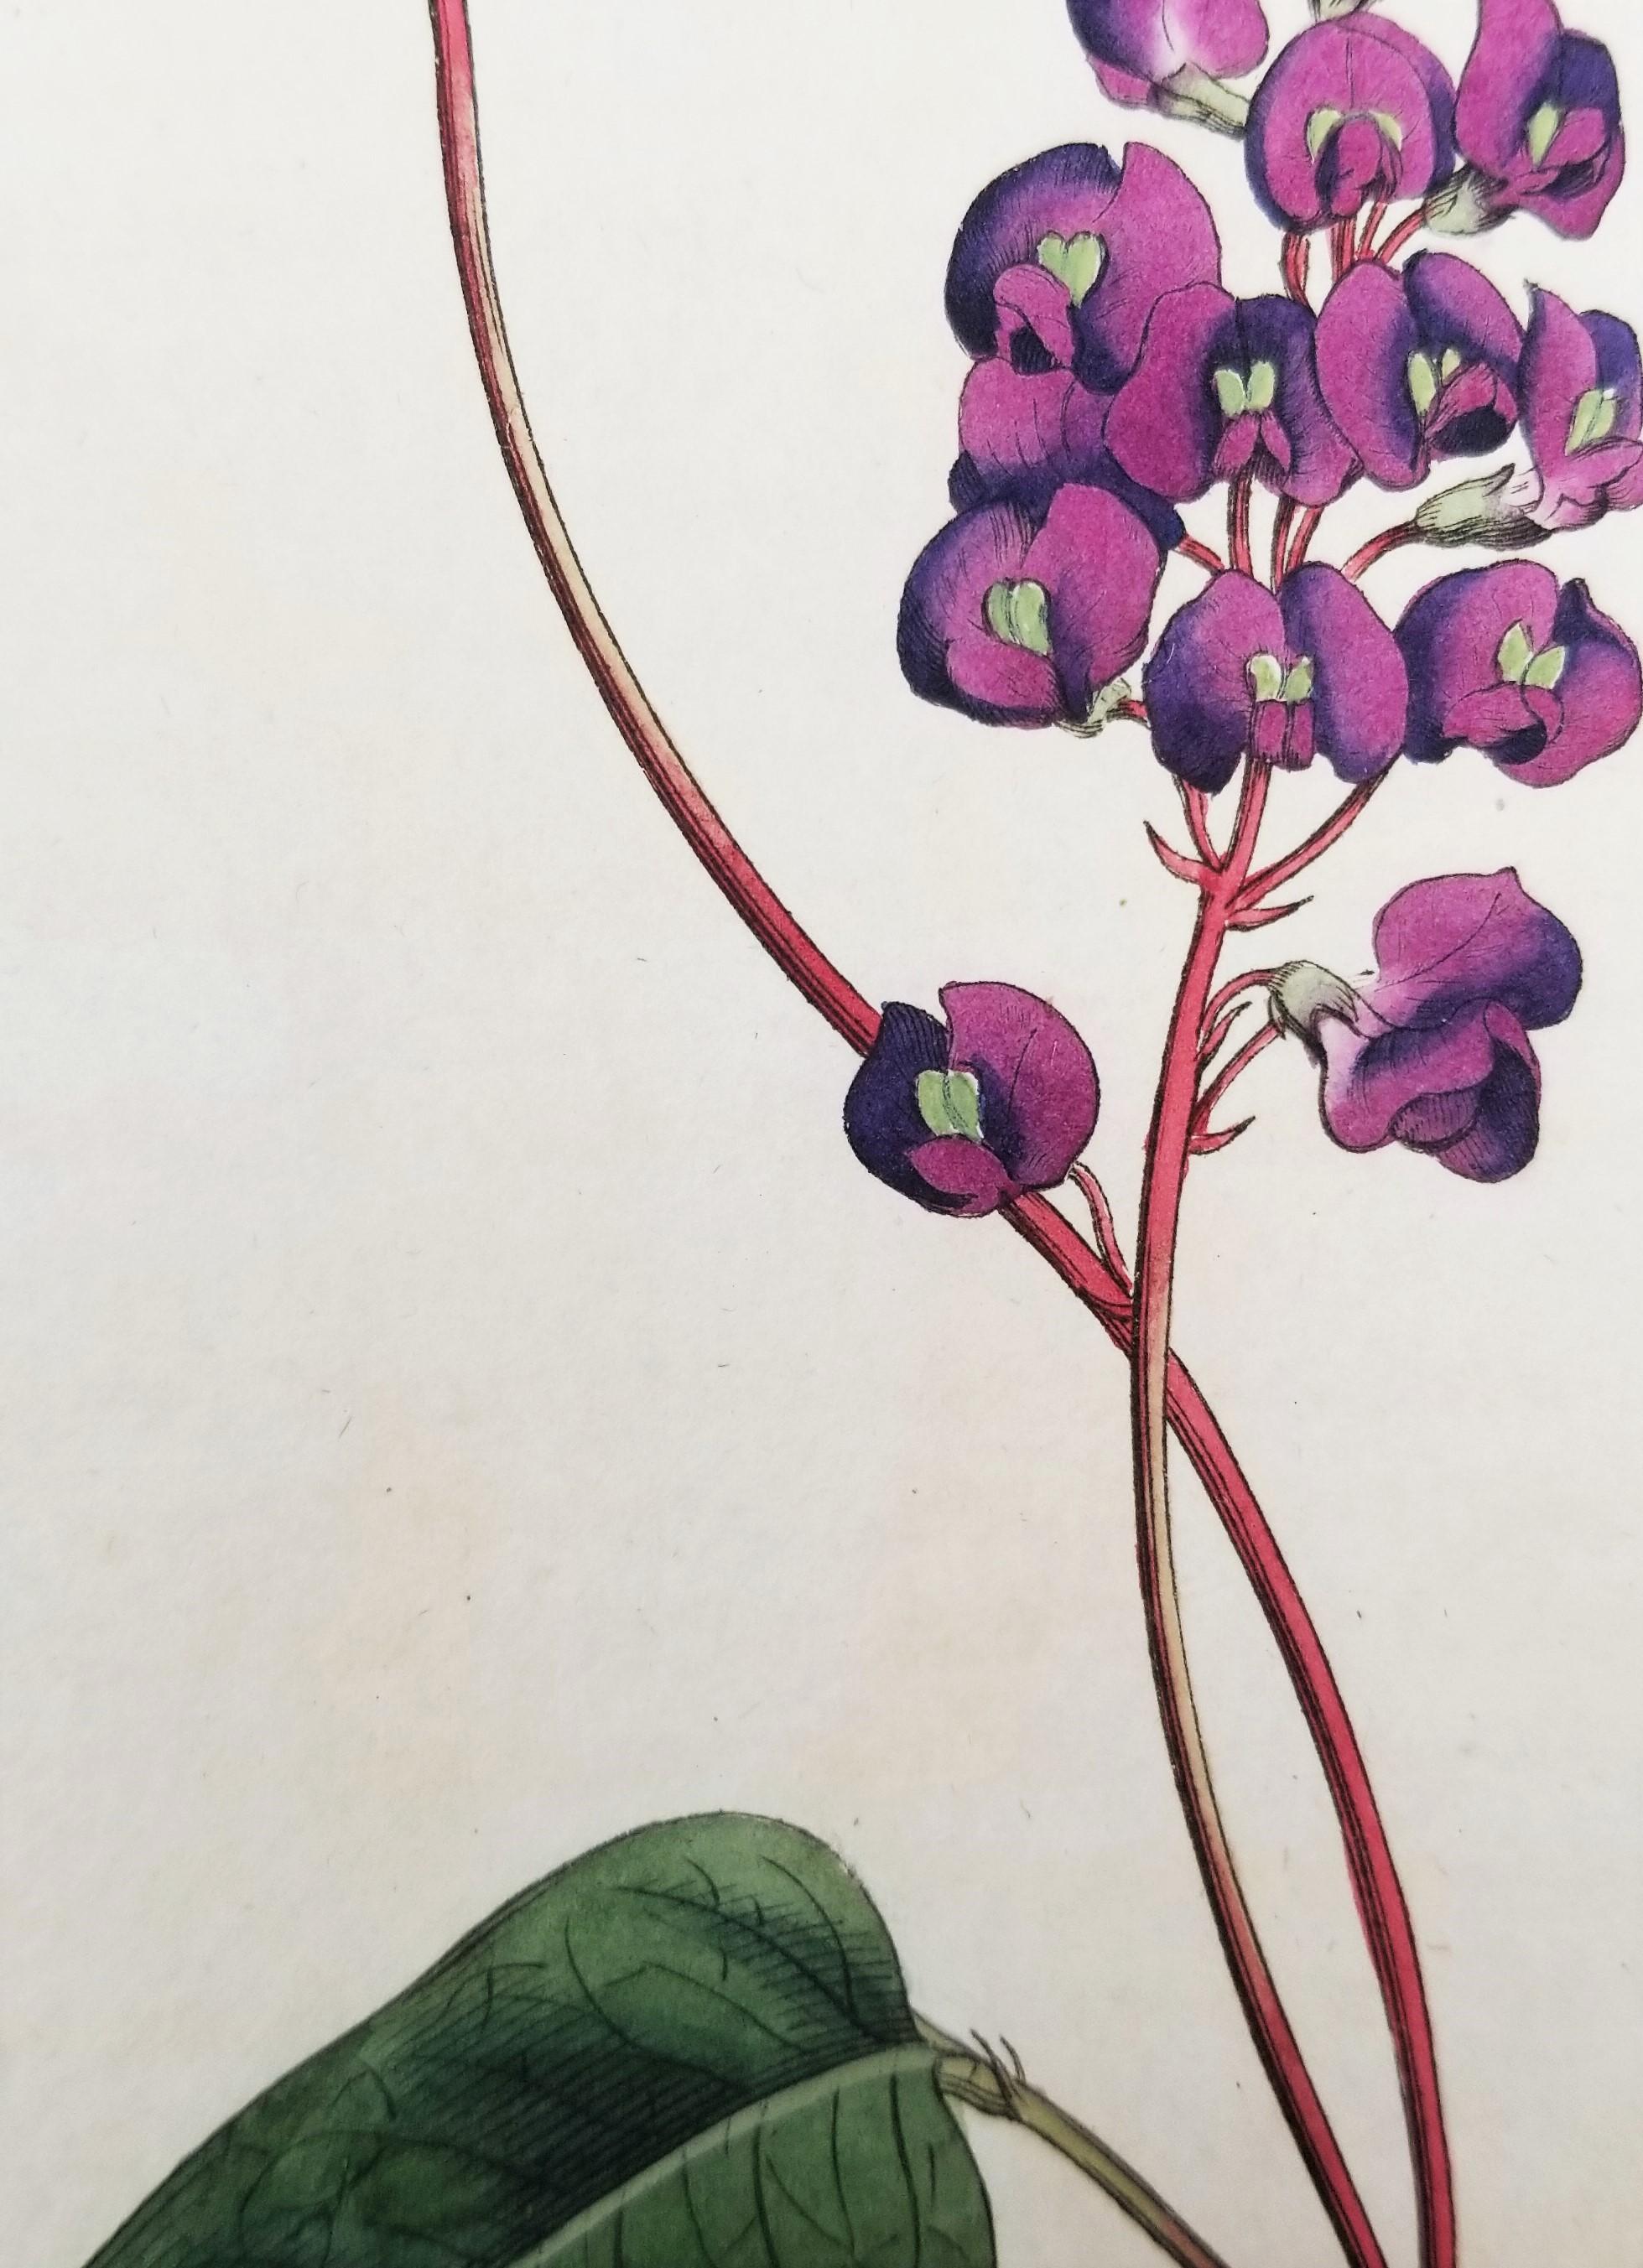 Set of Six Hand-Colored Engravings from Curtis's Botanical Magazine 3